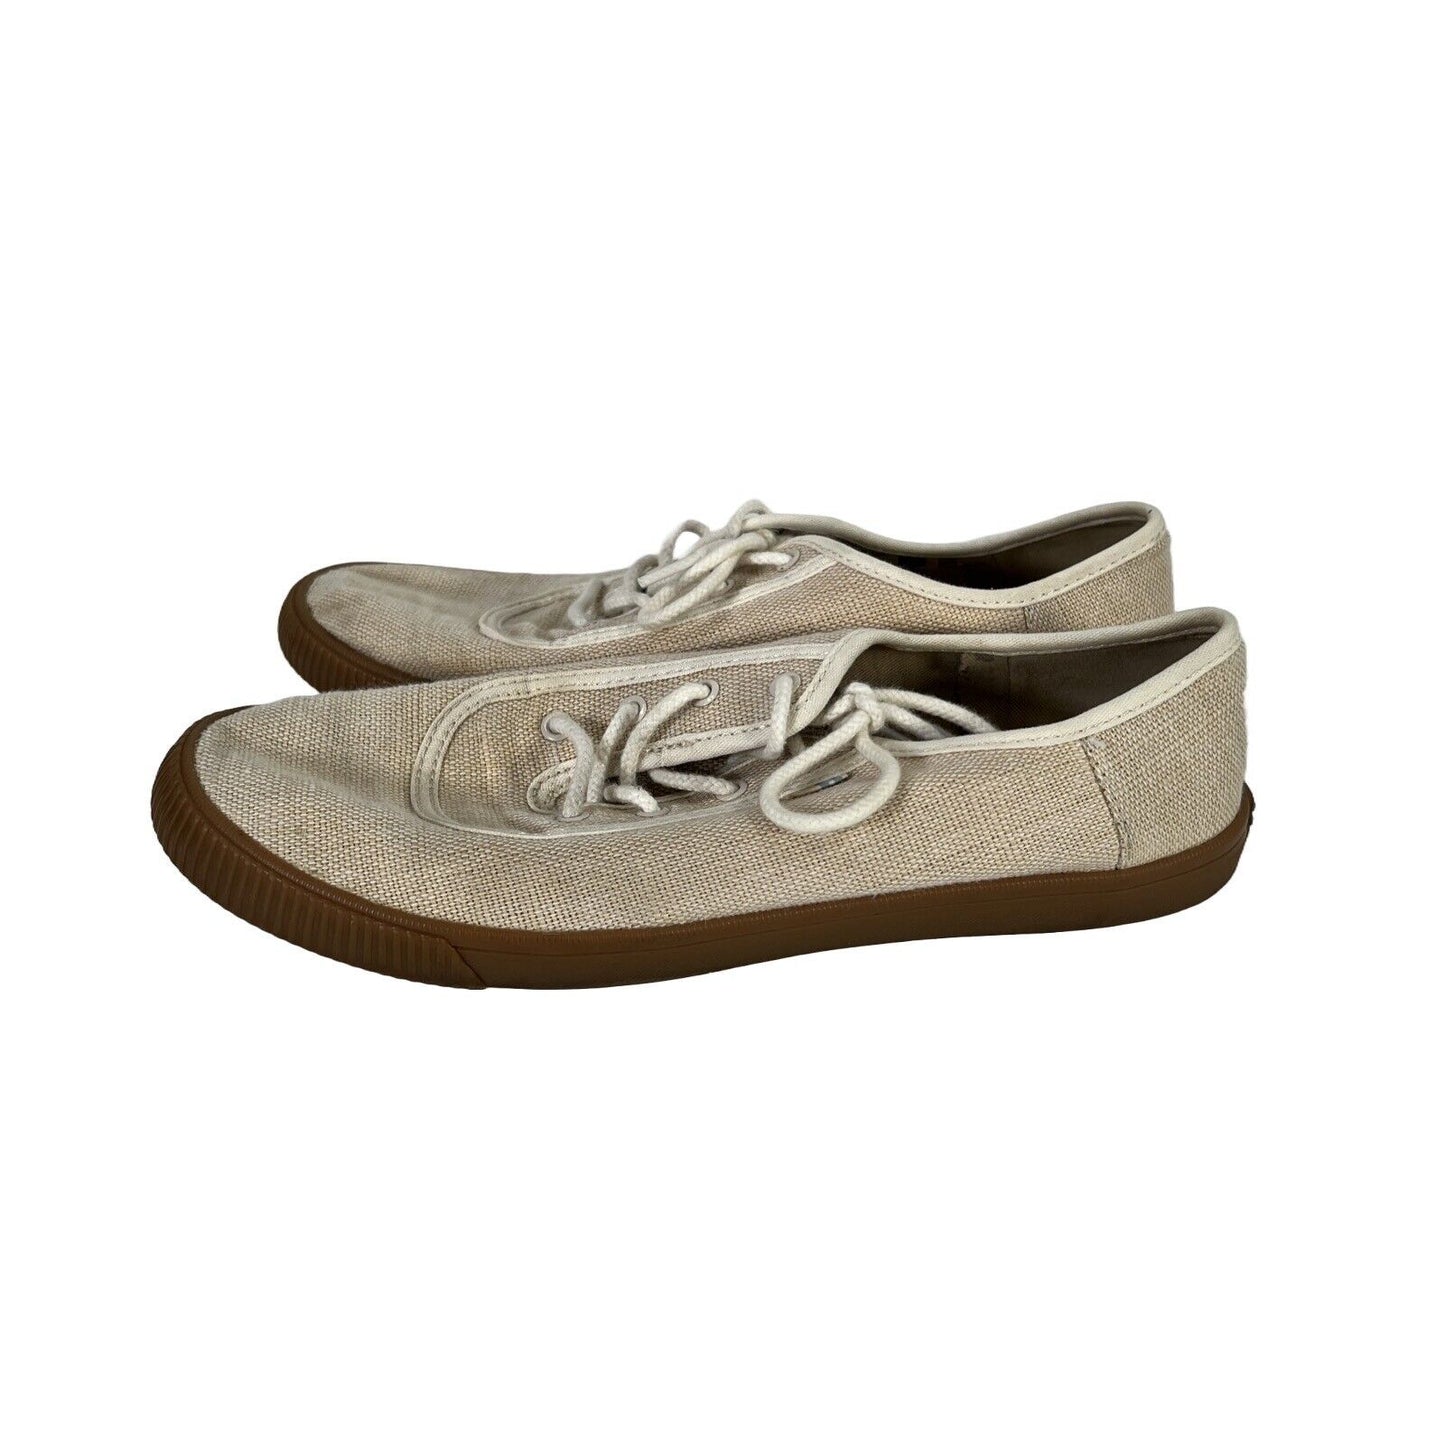 Toms Women's Beige/Tan Textile Lace Up Casual Sneakers - 7.5